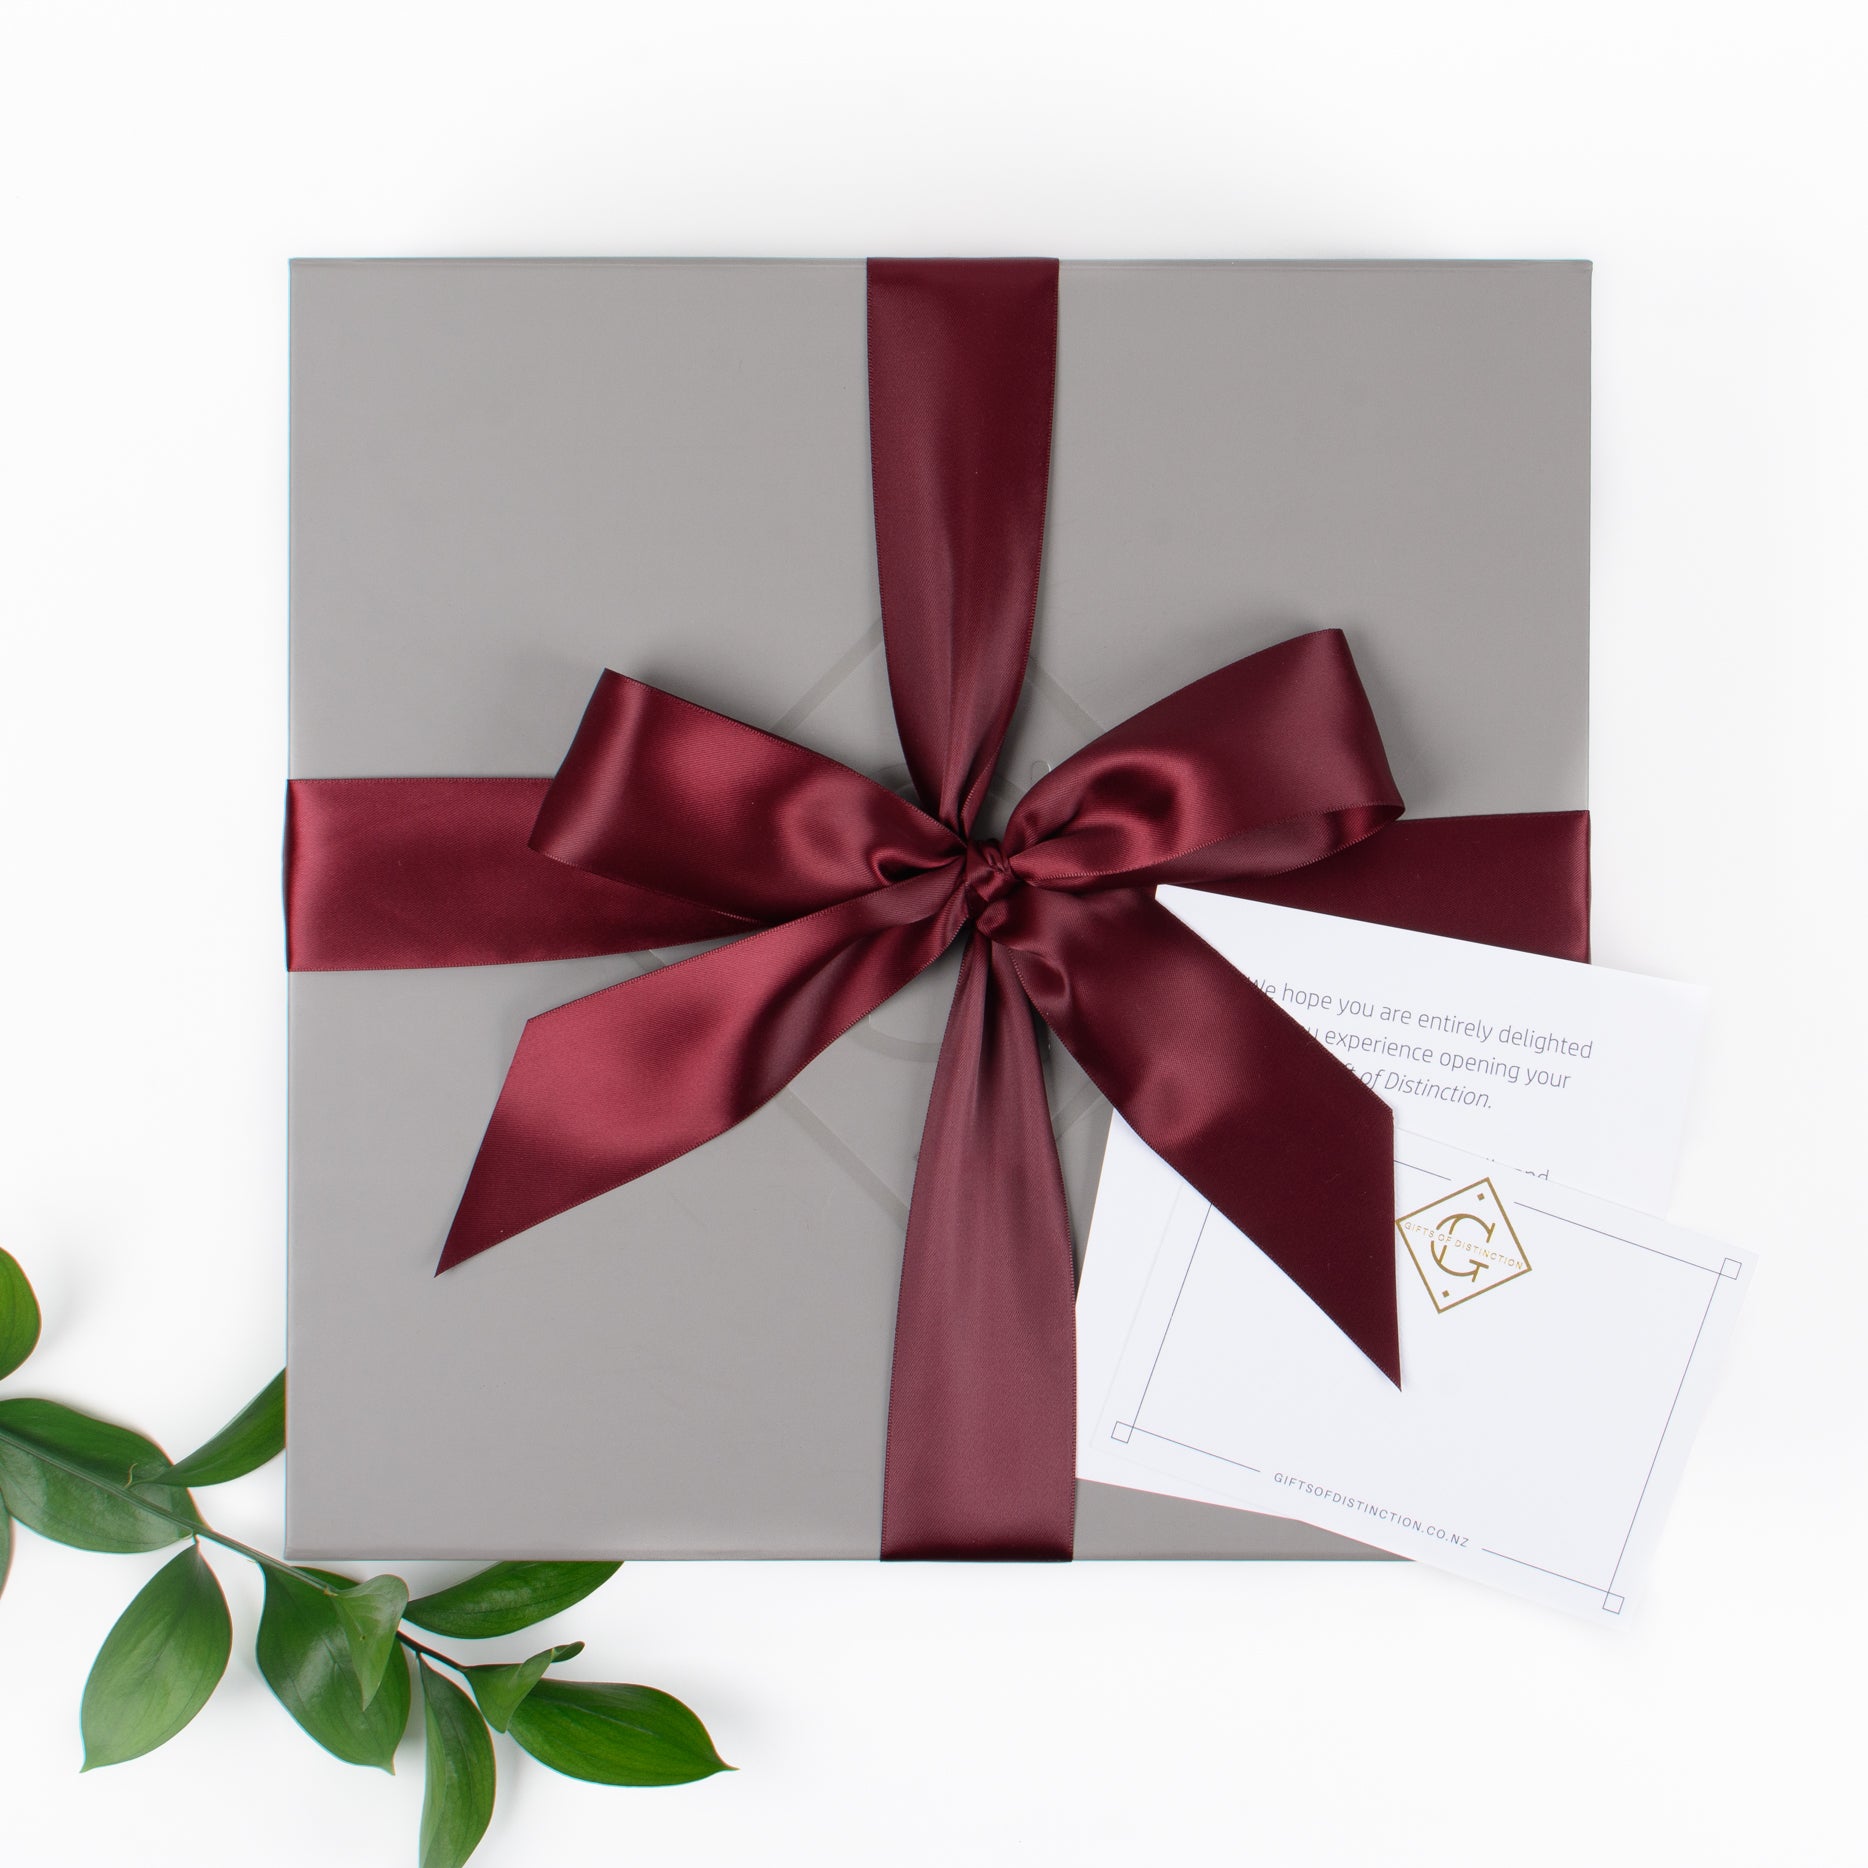 Mischief - Gift Boxes NZ - Gifts of Distinction